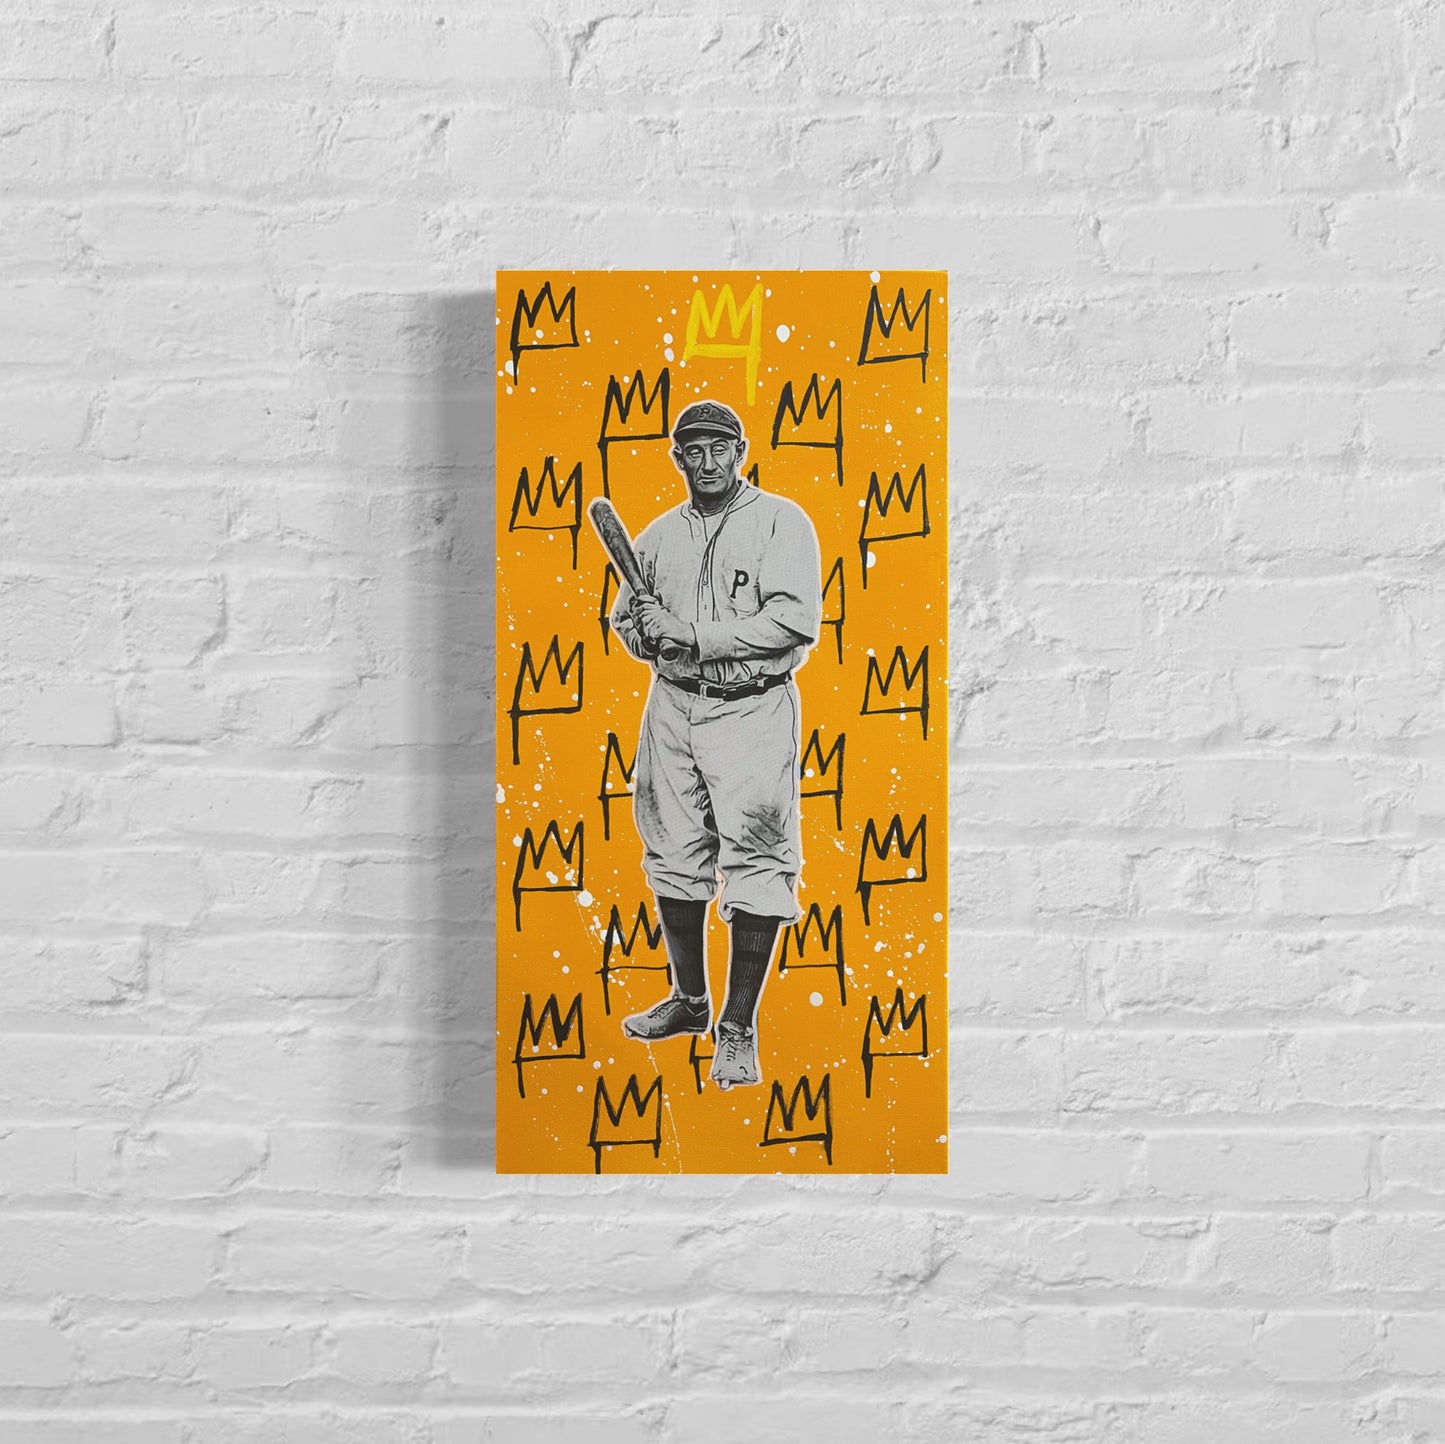 Honus Wagner: King Series, 2022. Original 1/1 Mixed Media on 12x24x1.5in Canvas